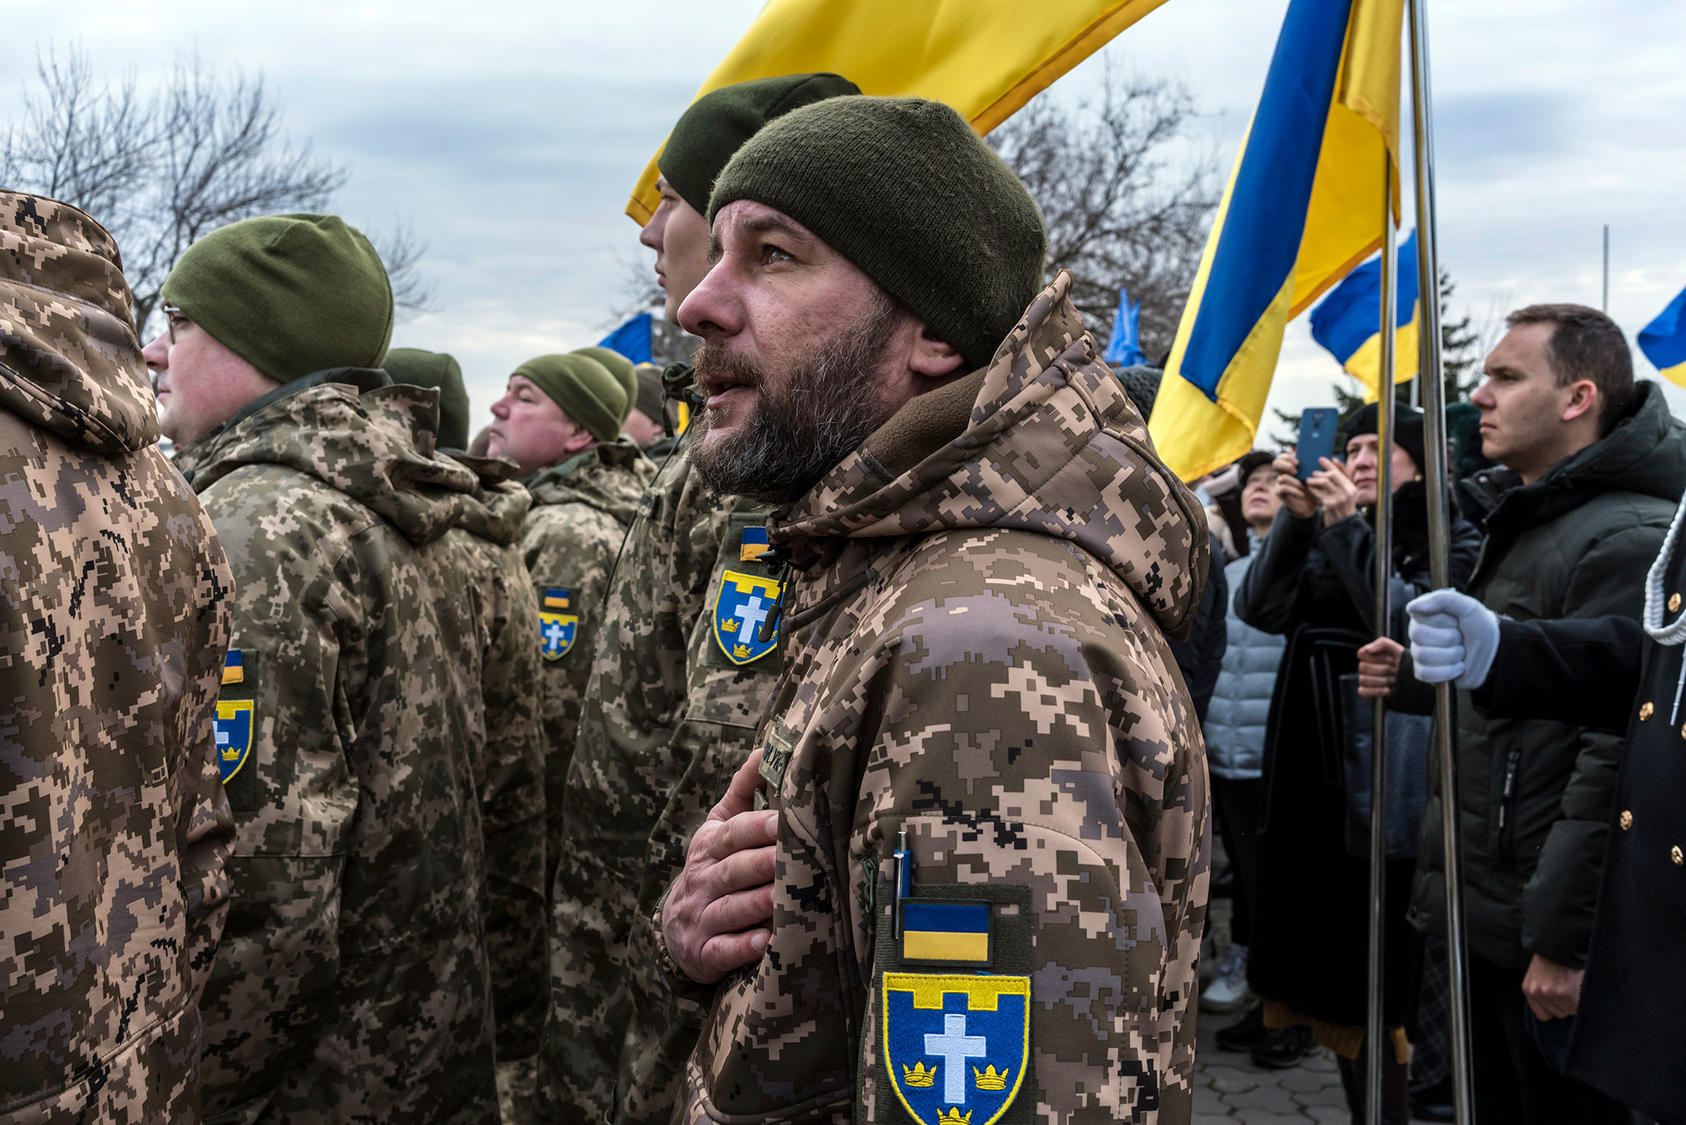 Soldiers sing their national anthem as the country faced Russia’s military buildup before the new invasion began in February. A million Ukrainians have fled the country since the new war began. (Brendan Hoffman/The New York Times)